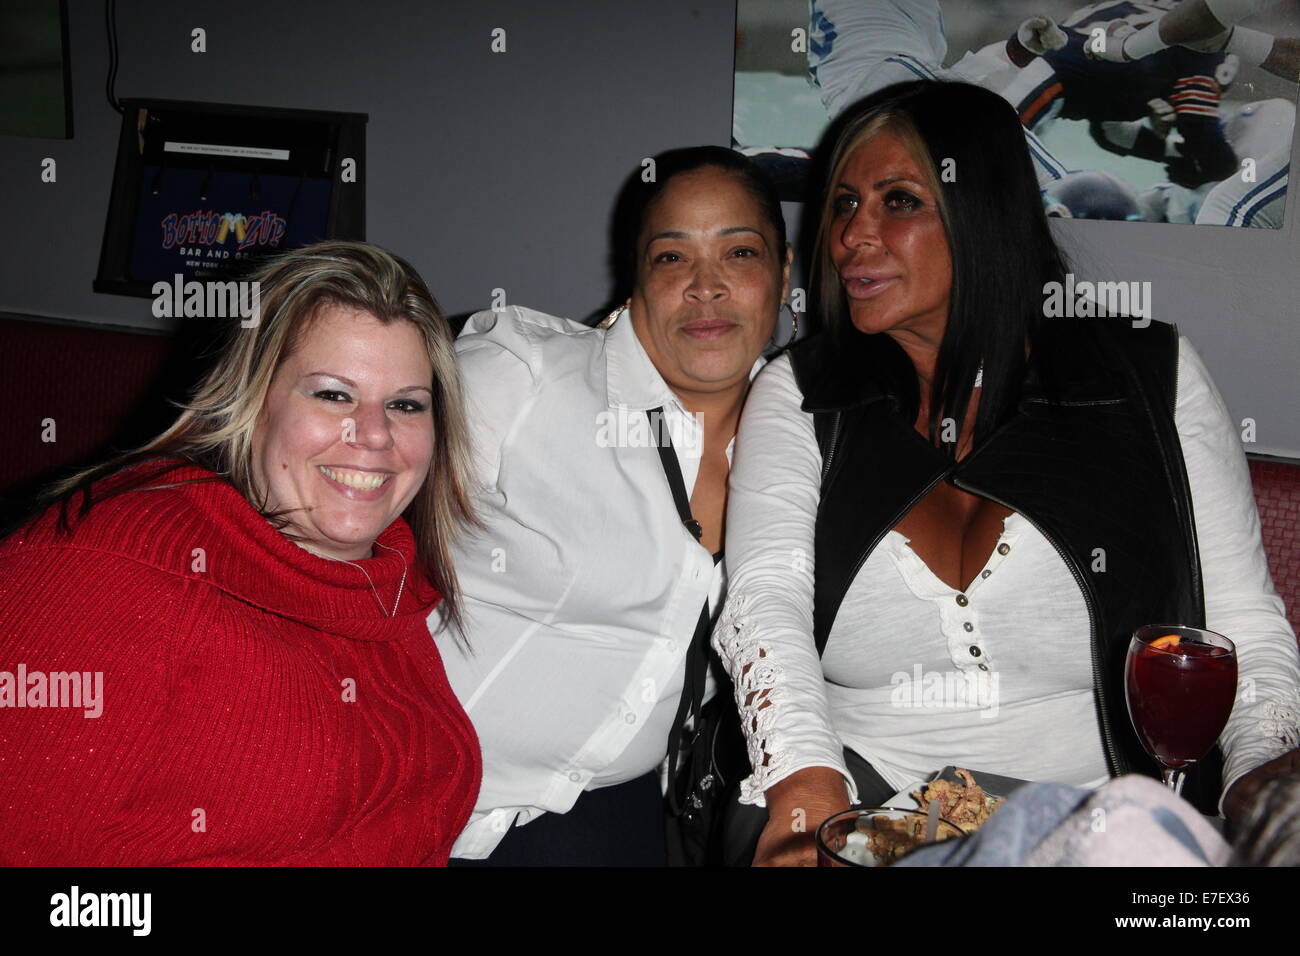 VH1 Mobwives Star Big Ang hosts the Bottomz Up Best New York City Bartender Contest at Bottomz Up Bar & Grill  Featuring: Corinne Brown,Yolanda Manfredy,Big Ang Raiola Where: New York City, New York, United States When: 13 Mar 2014 Stock Photo